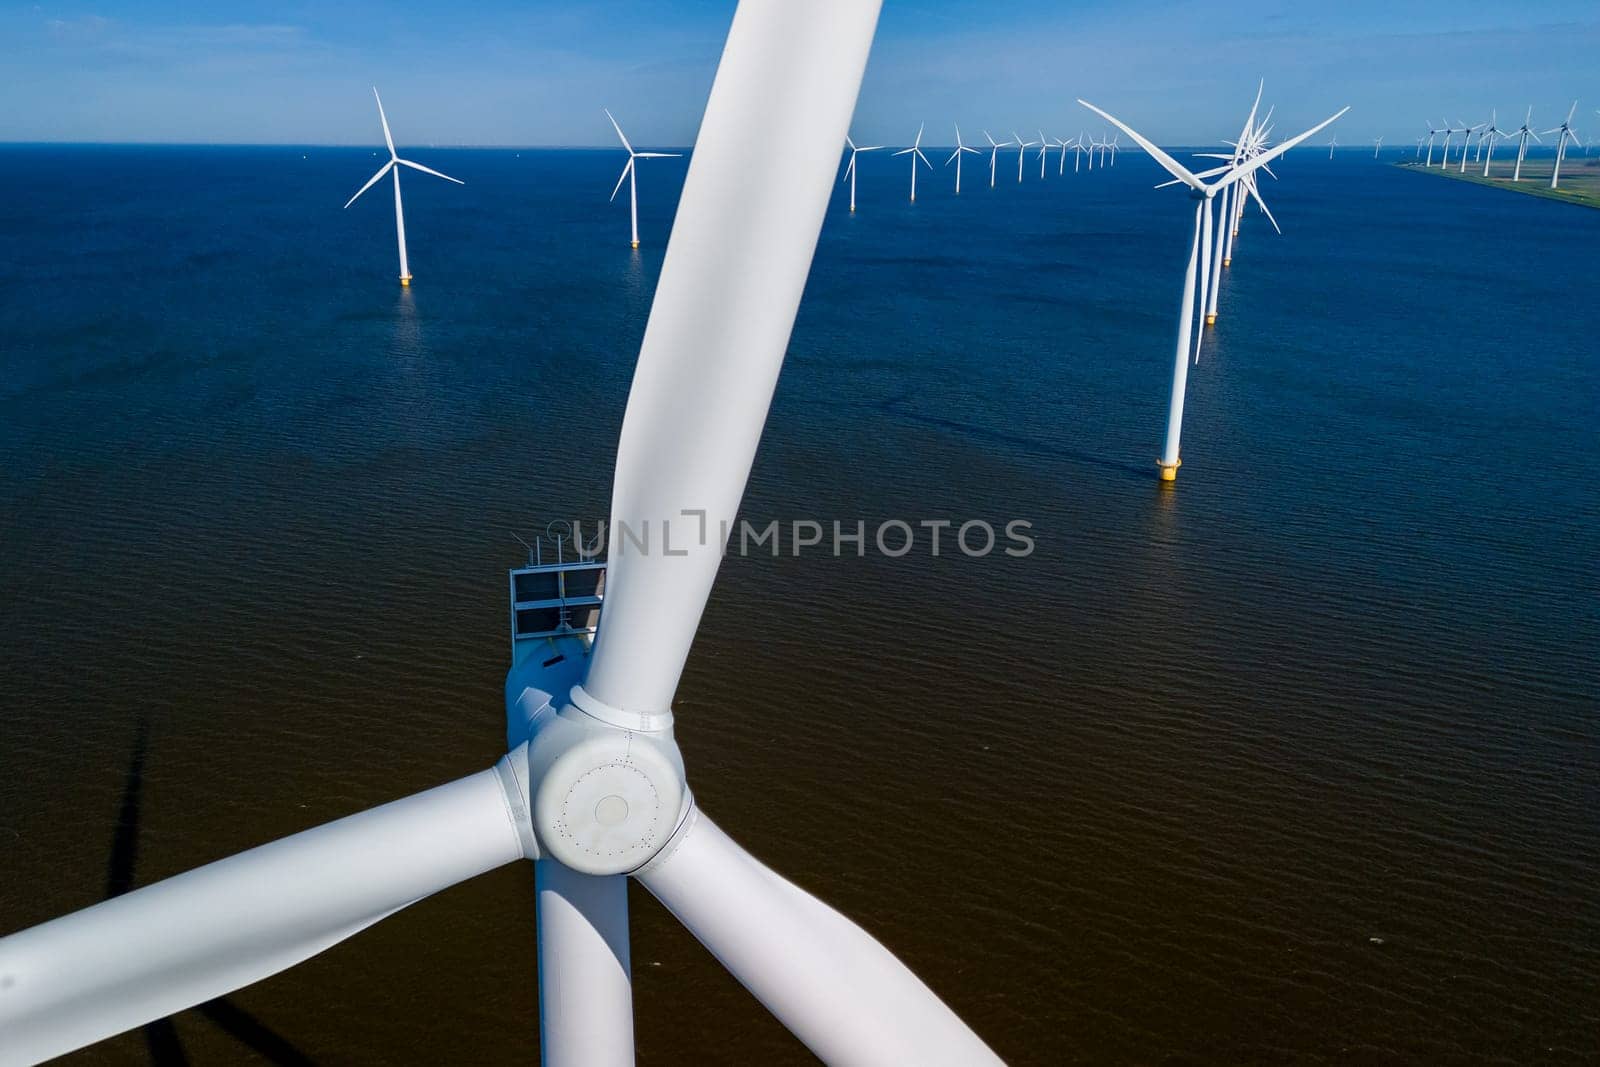 A mesmerizing sight of a group of wind turbines gracefully spinning in the ocean by fokkebok